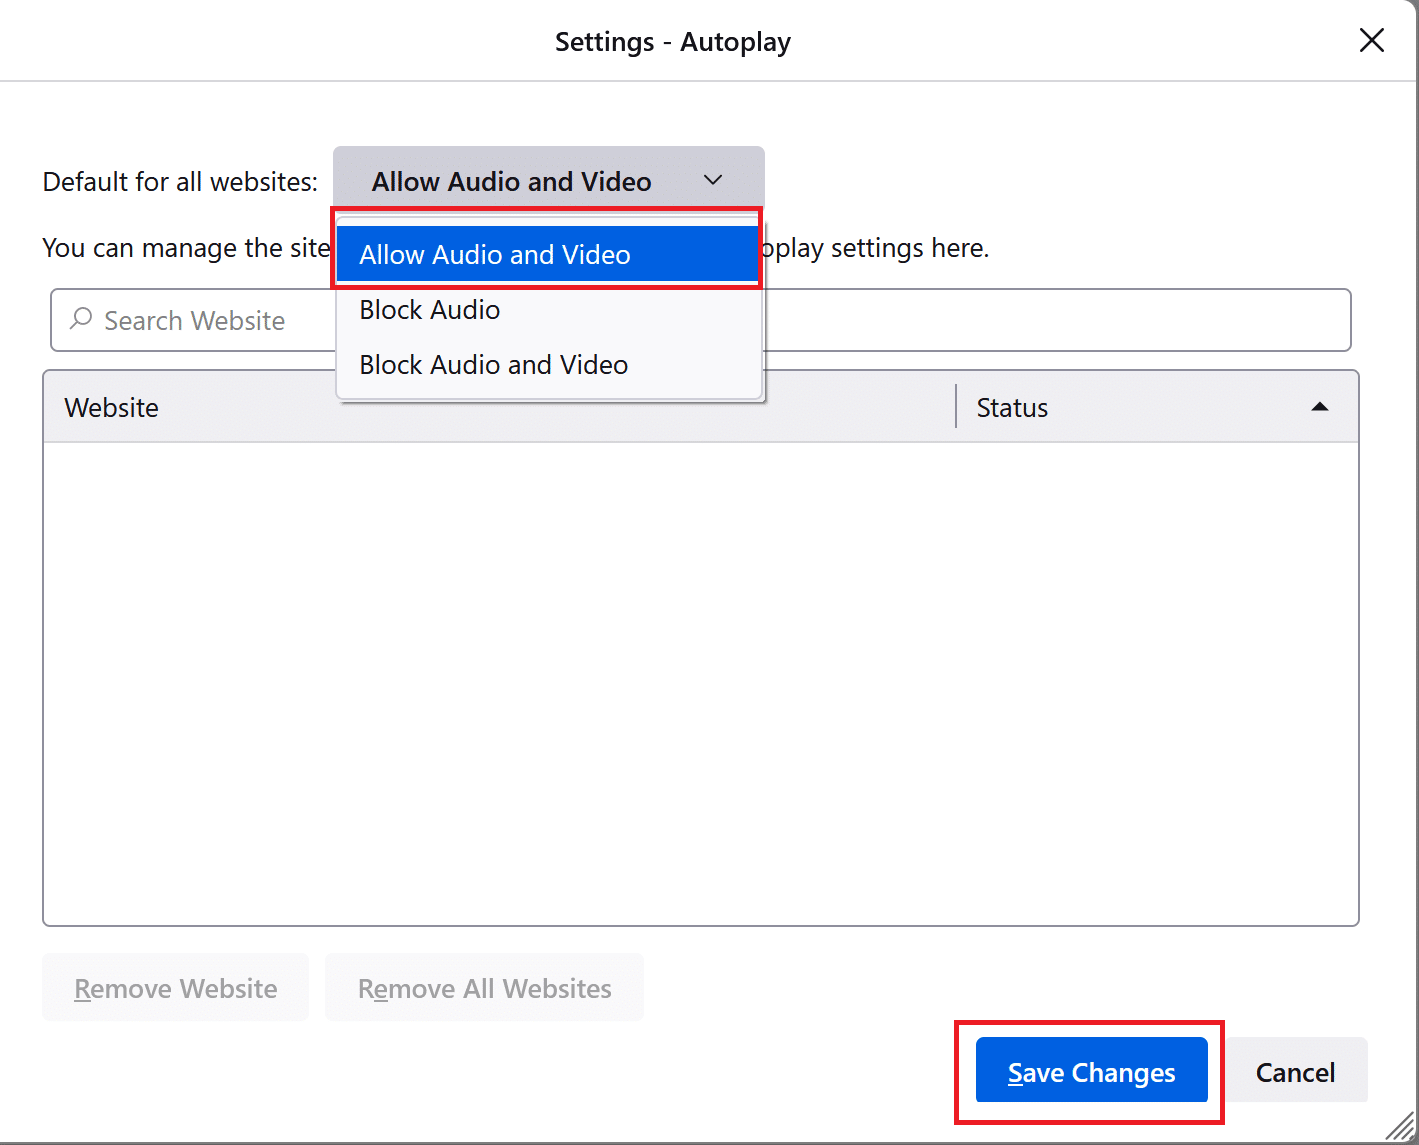 Firefox Autoplay settings - allow audio and video | How to Fix Firefox Not Playing Videos